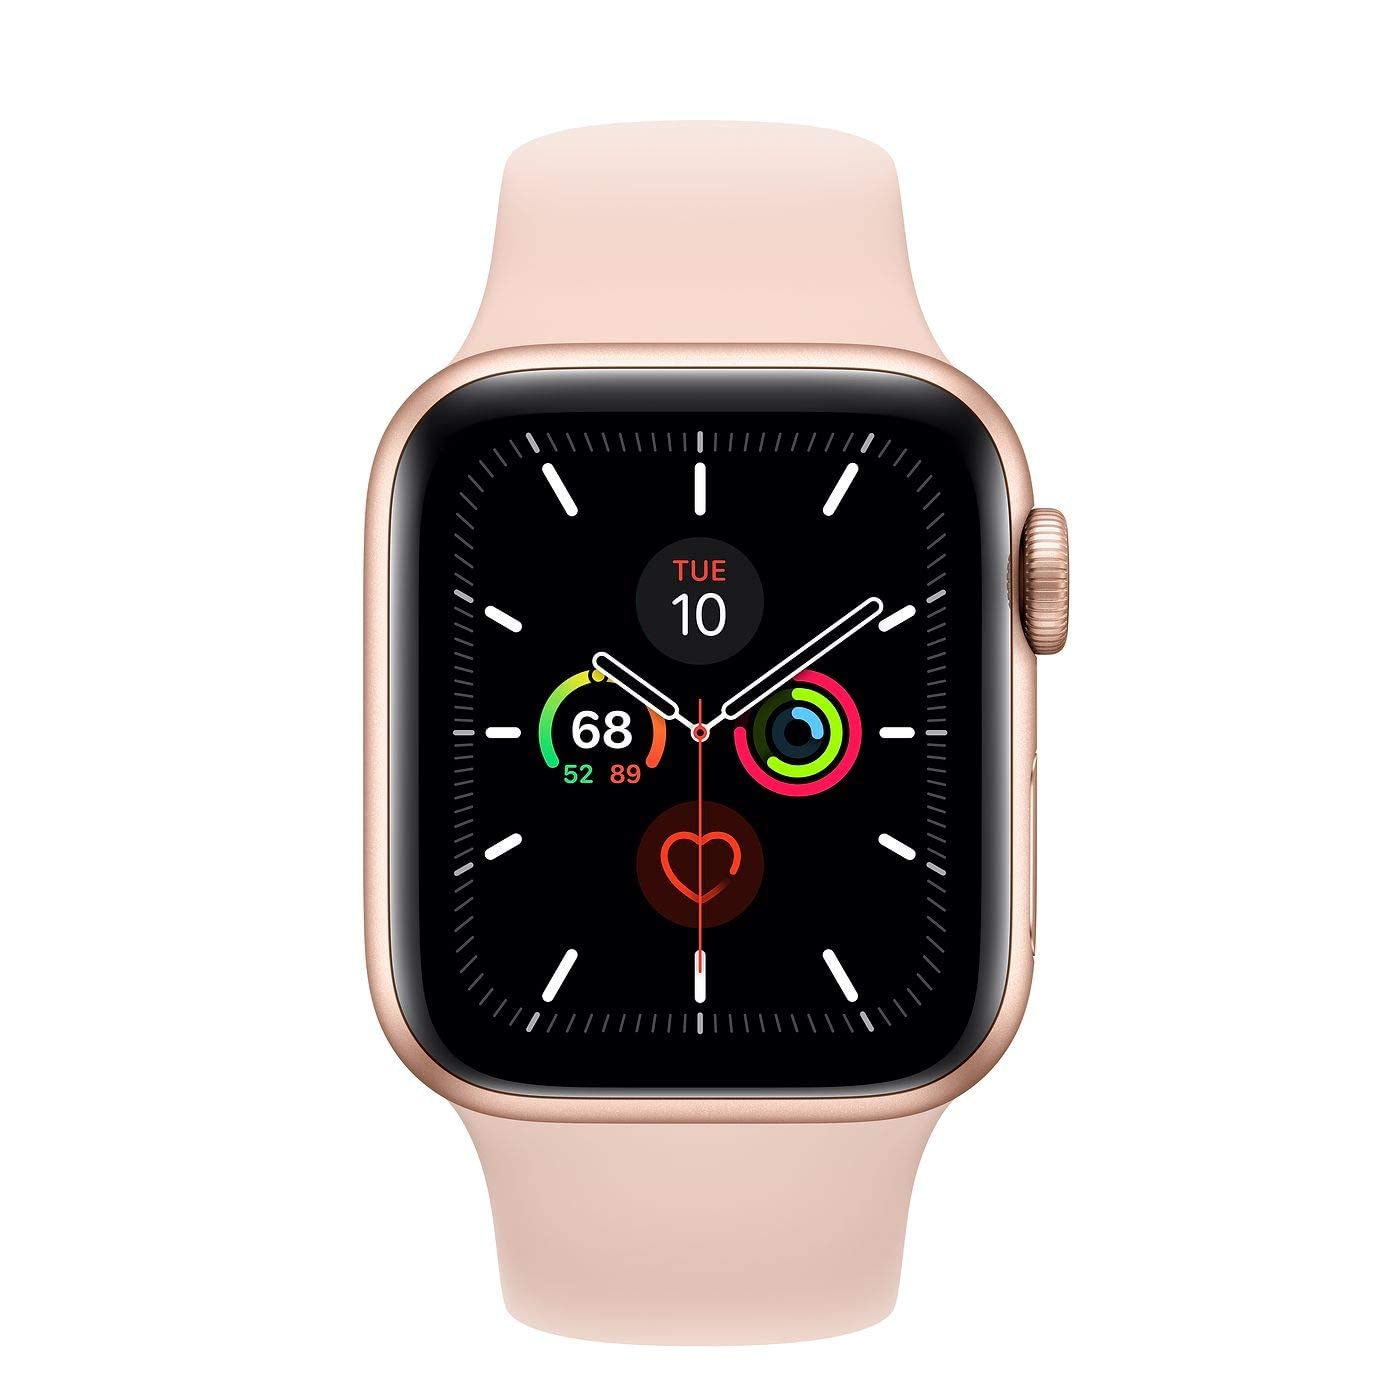 Apple Watch Series 4 (GPS, 40MM) - Gold Aluminum Case with Pink Sand Sport Band (Renewed)